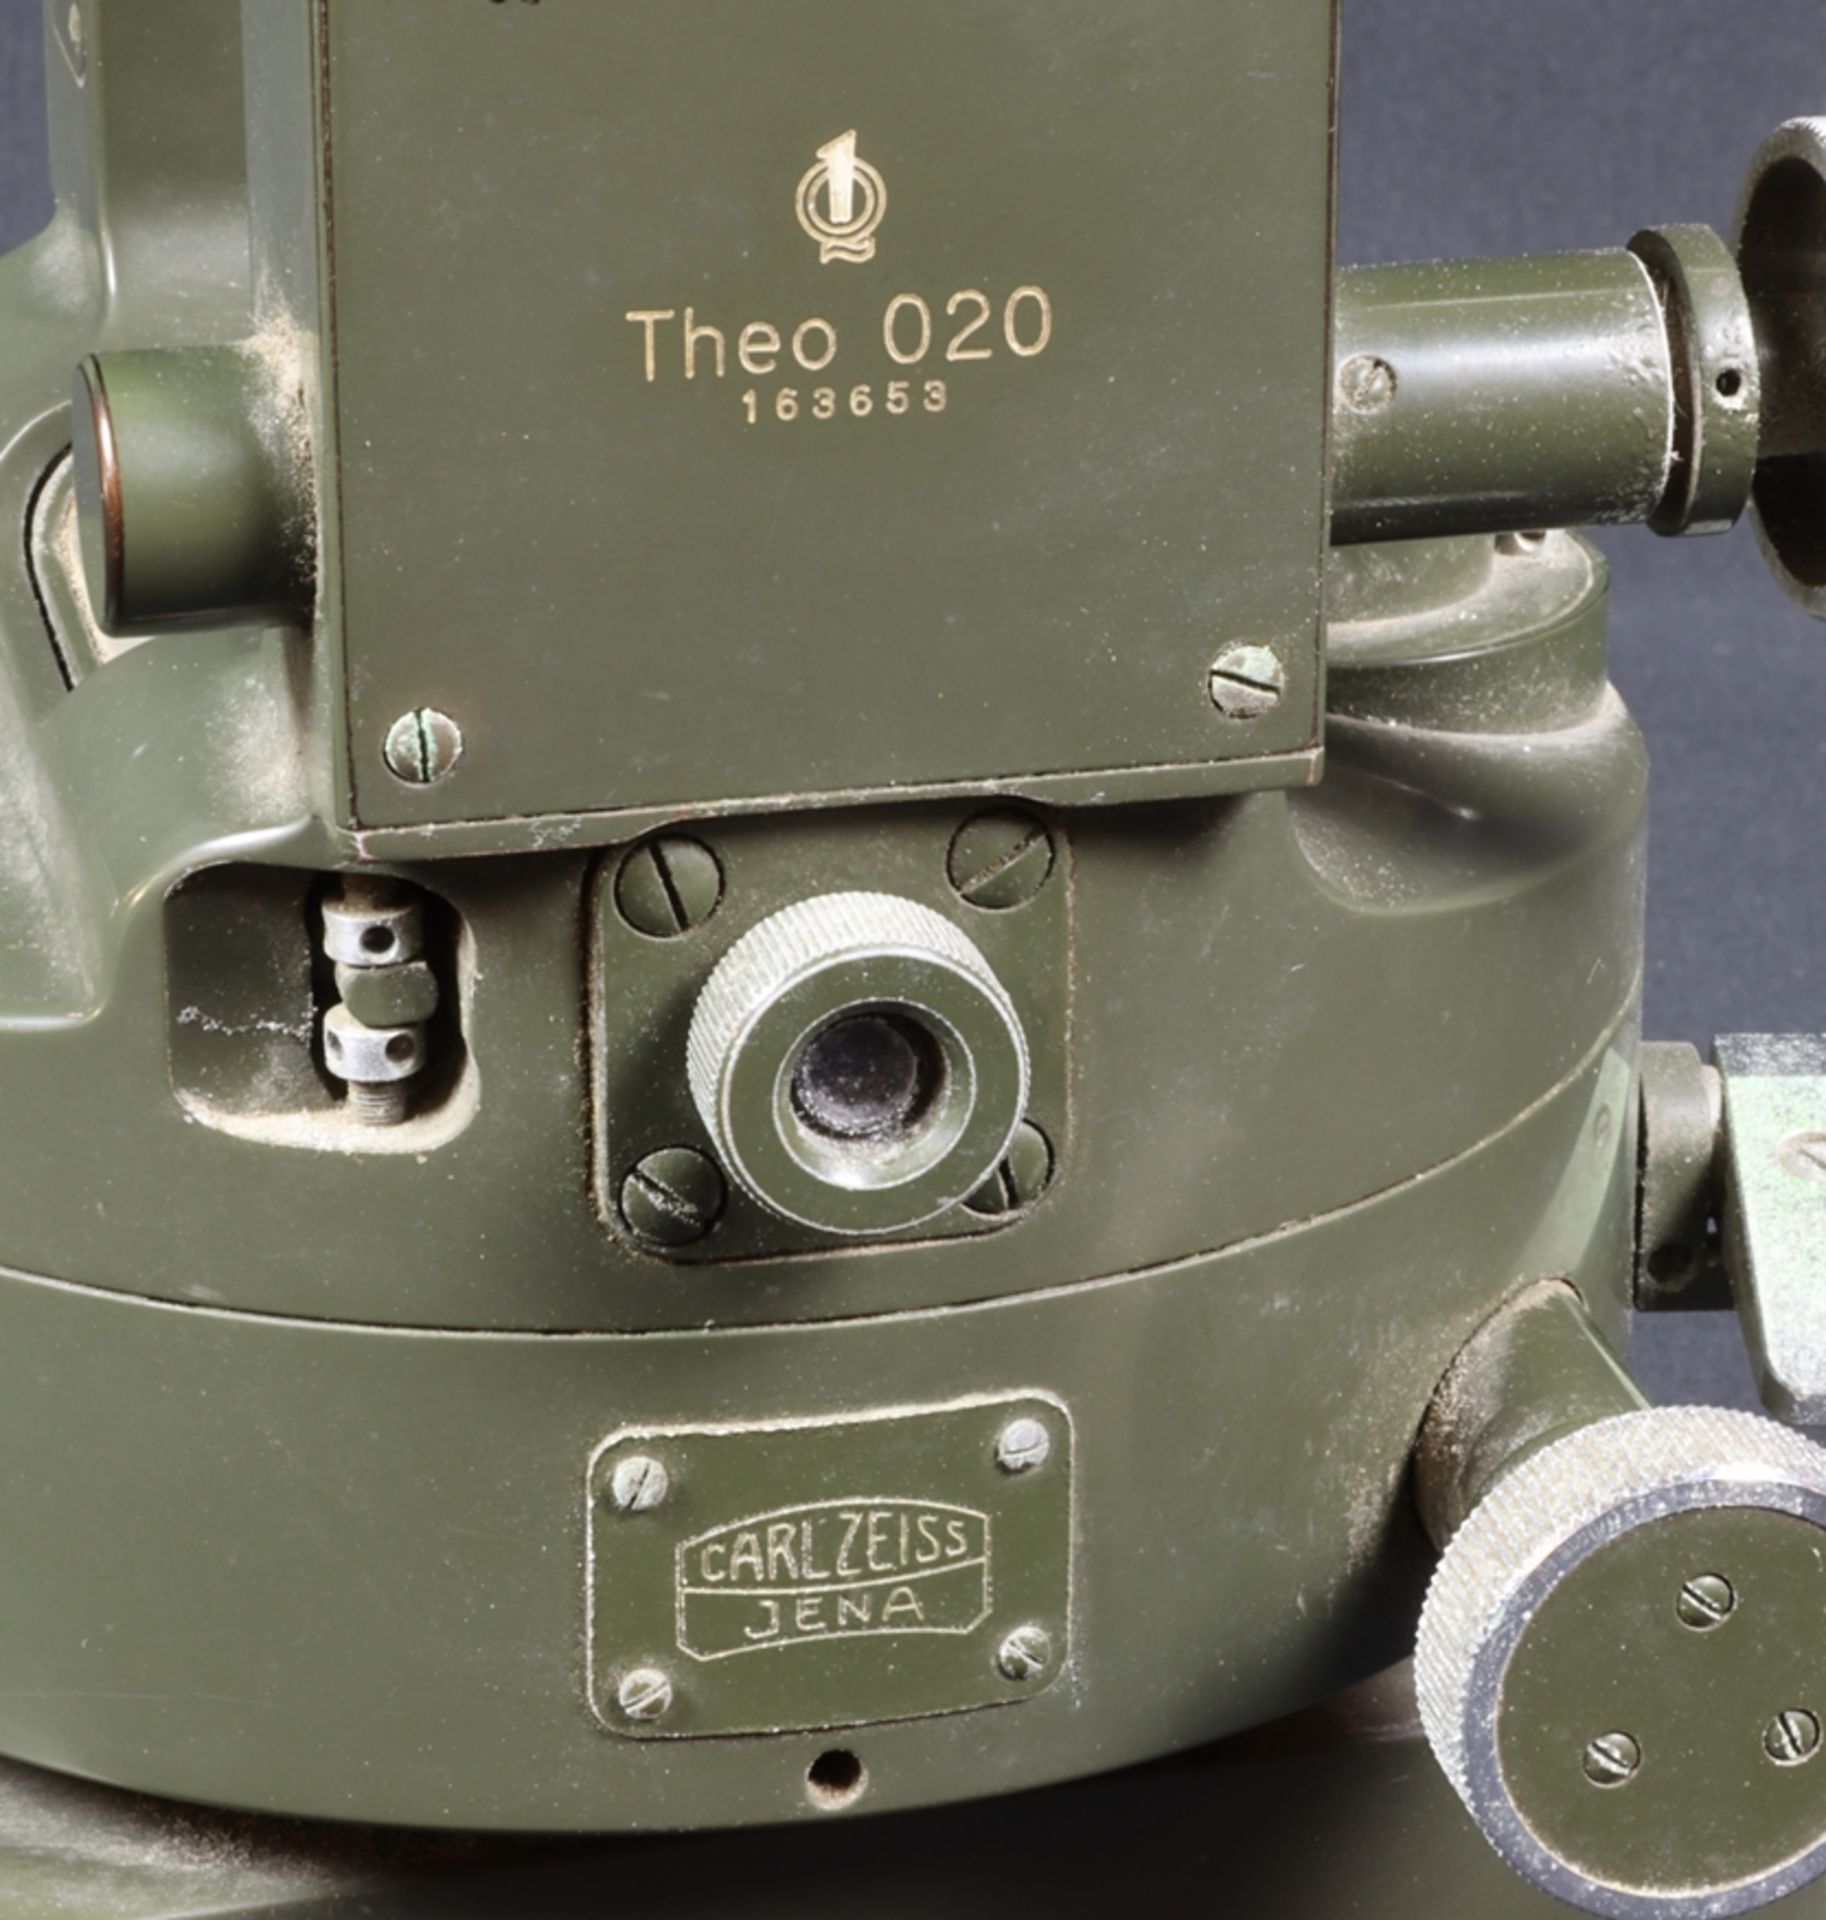 Theodolite Military measuring device, Carl-Zeiss-Jena 50s of the 20th century, GDR - Image 3 of 3